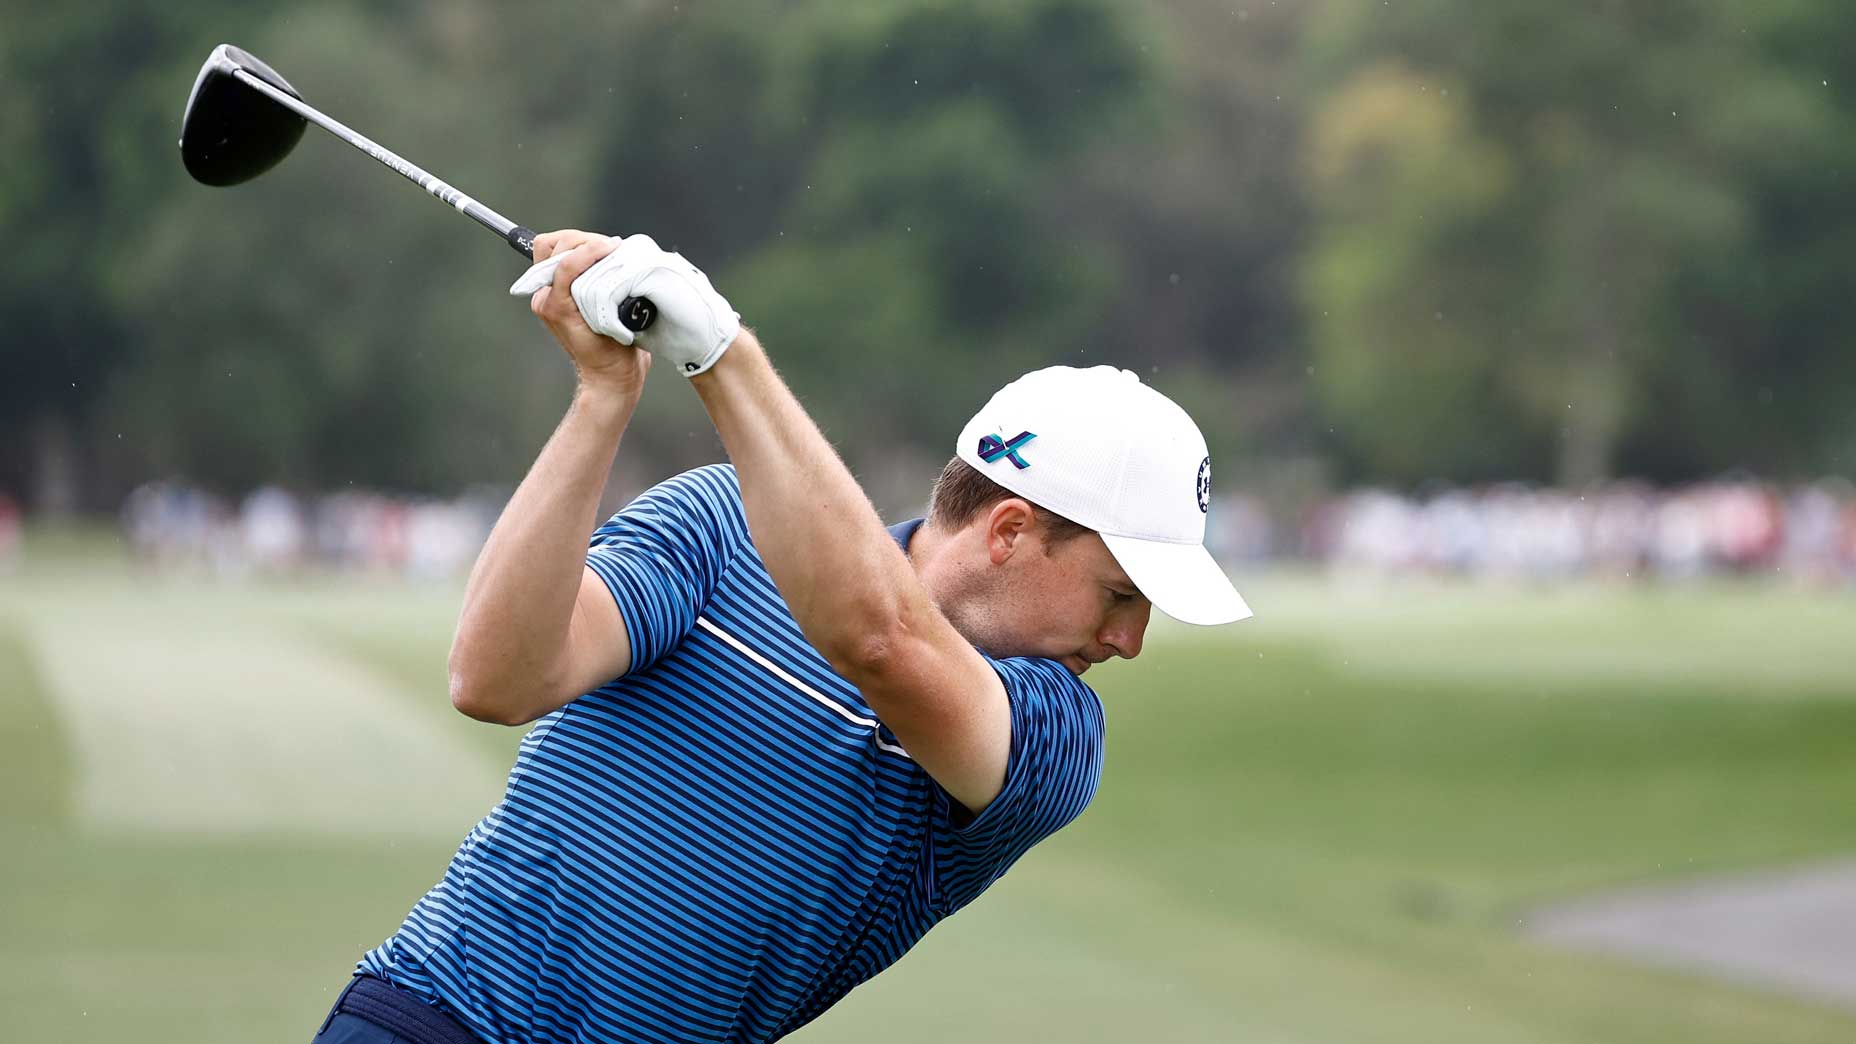 This drill from Justin Rose's short-game coach fixed my chipping woes